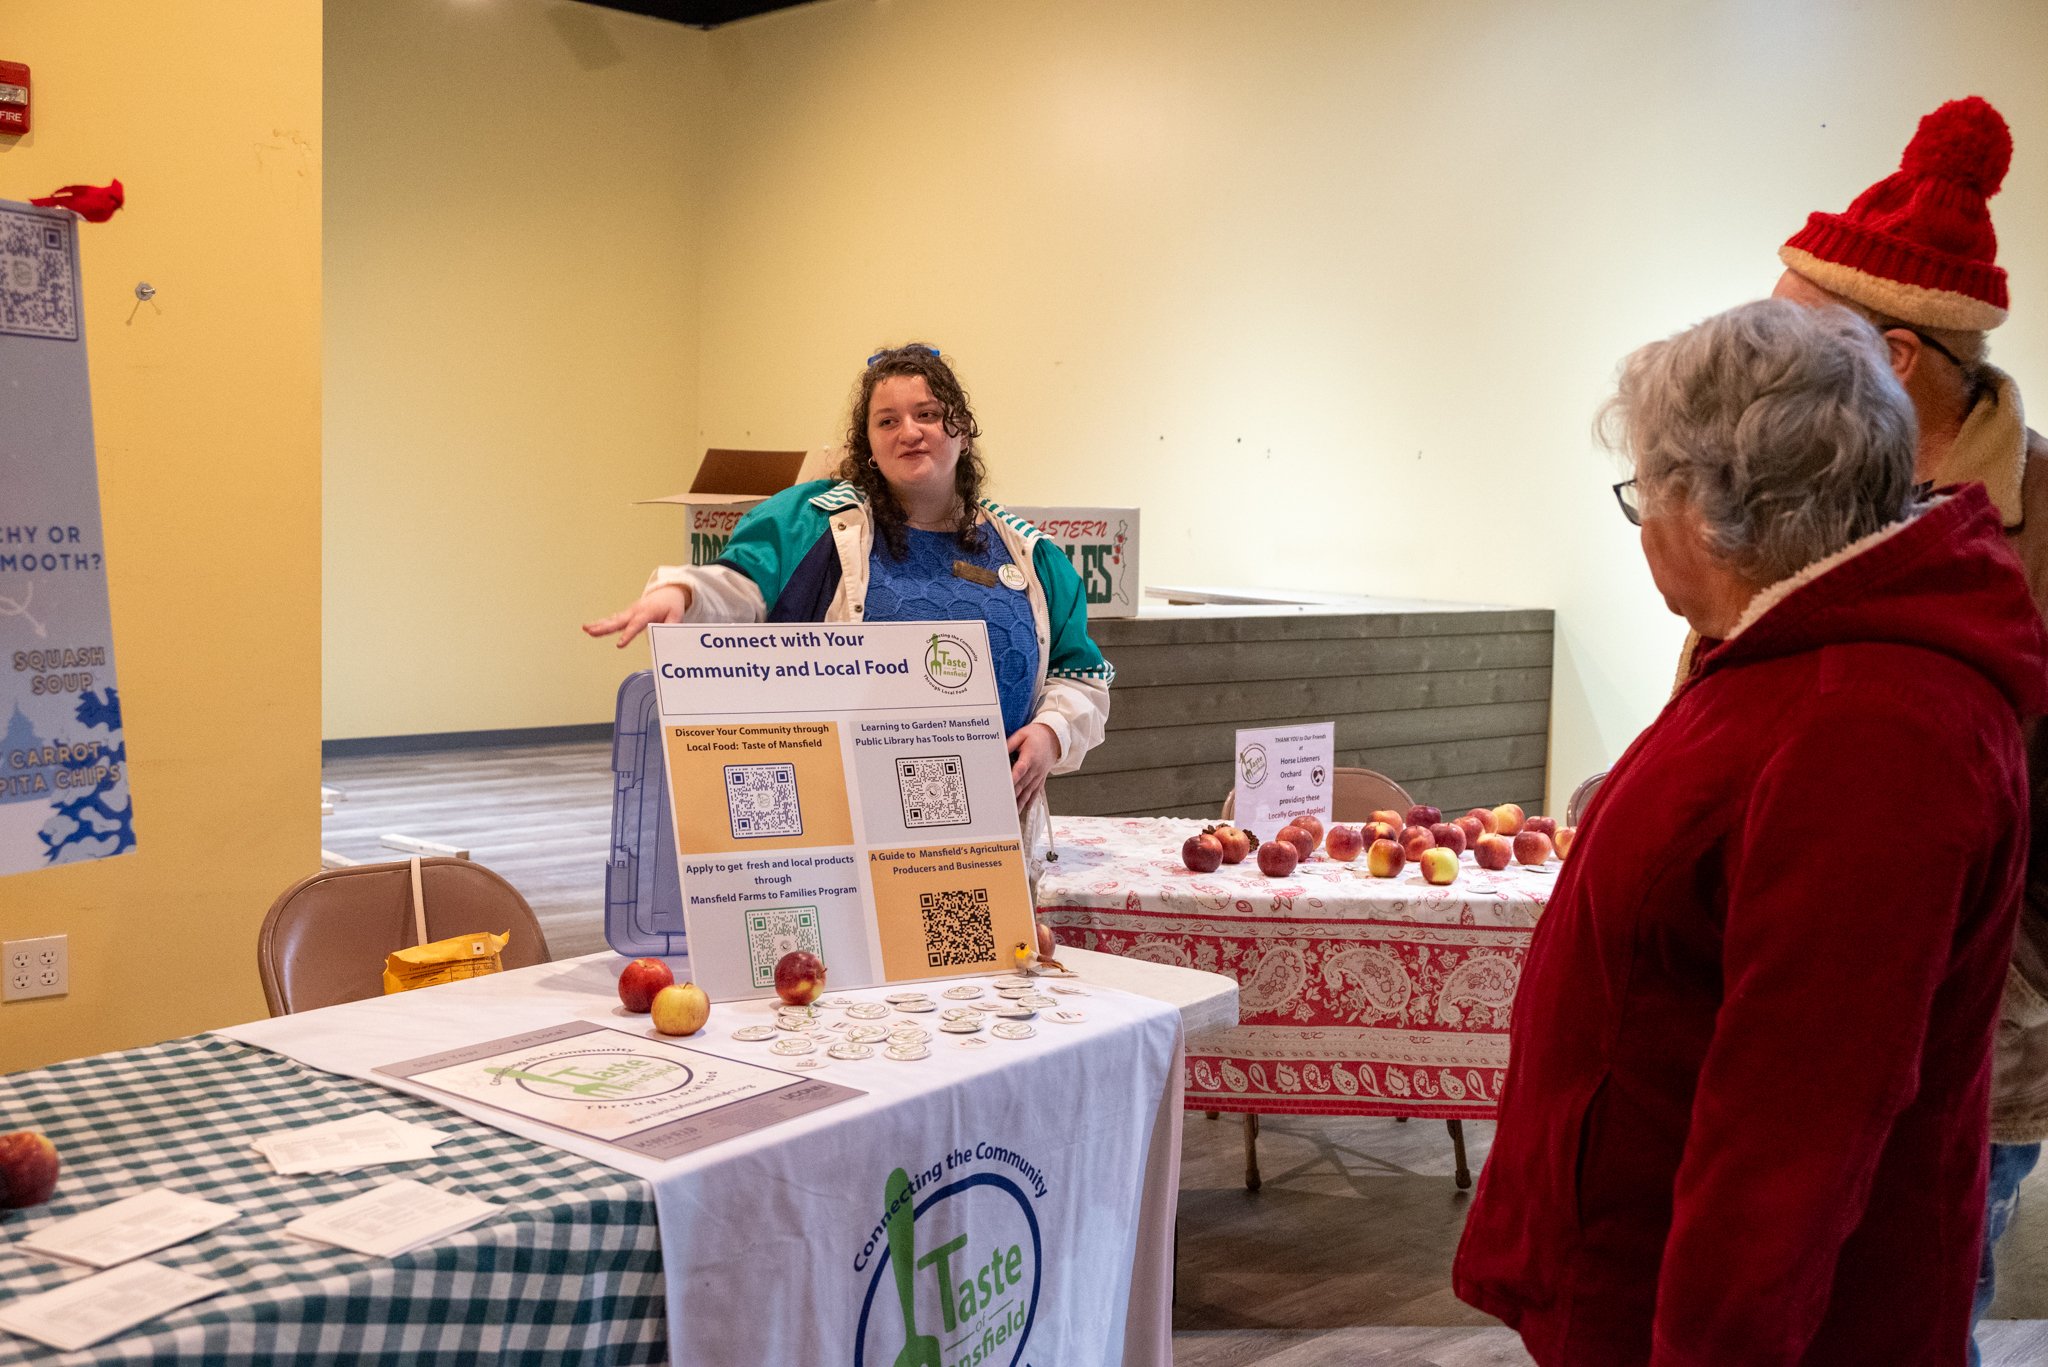 MDP Administrative Assistant Rosemary Watson sharing info about local farms